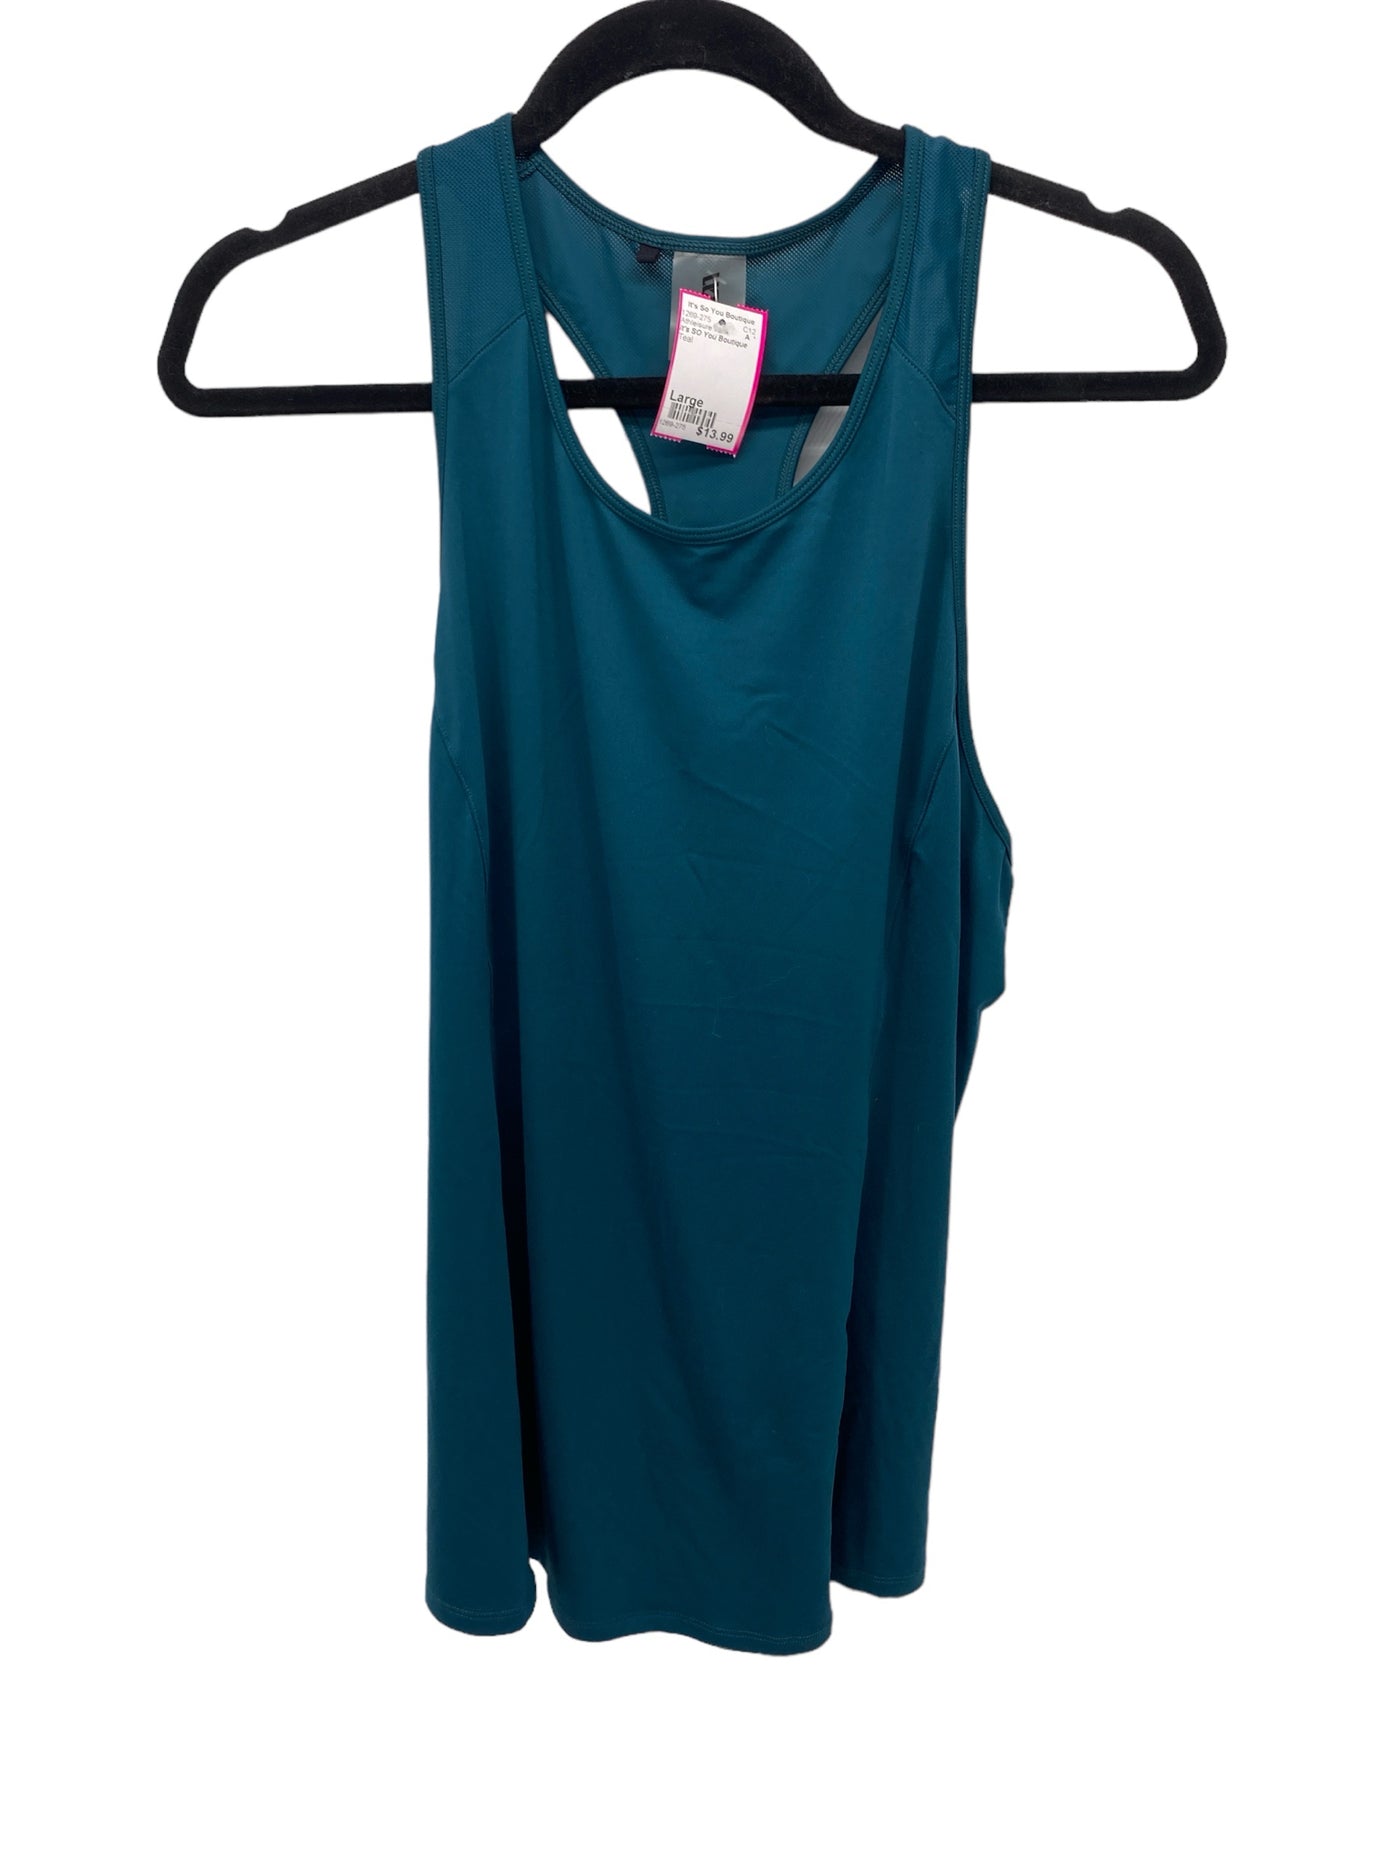 It's SO You Boutique Misses Size Large Teal Athleisure Tank